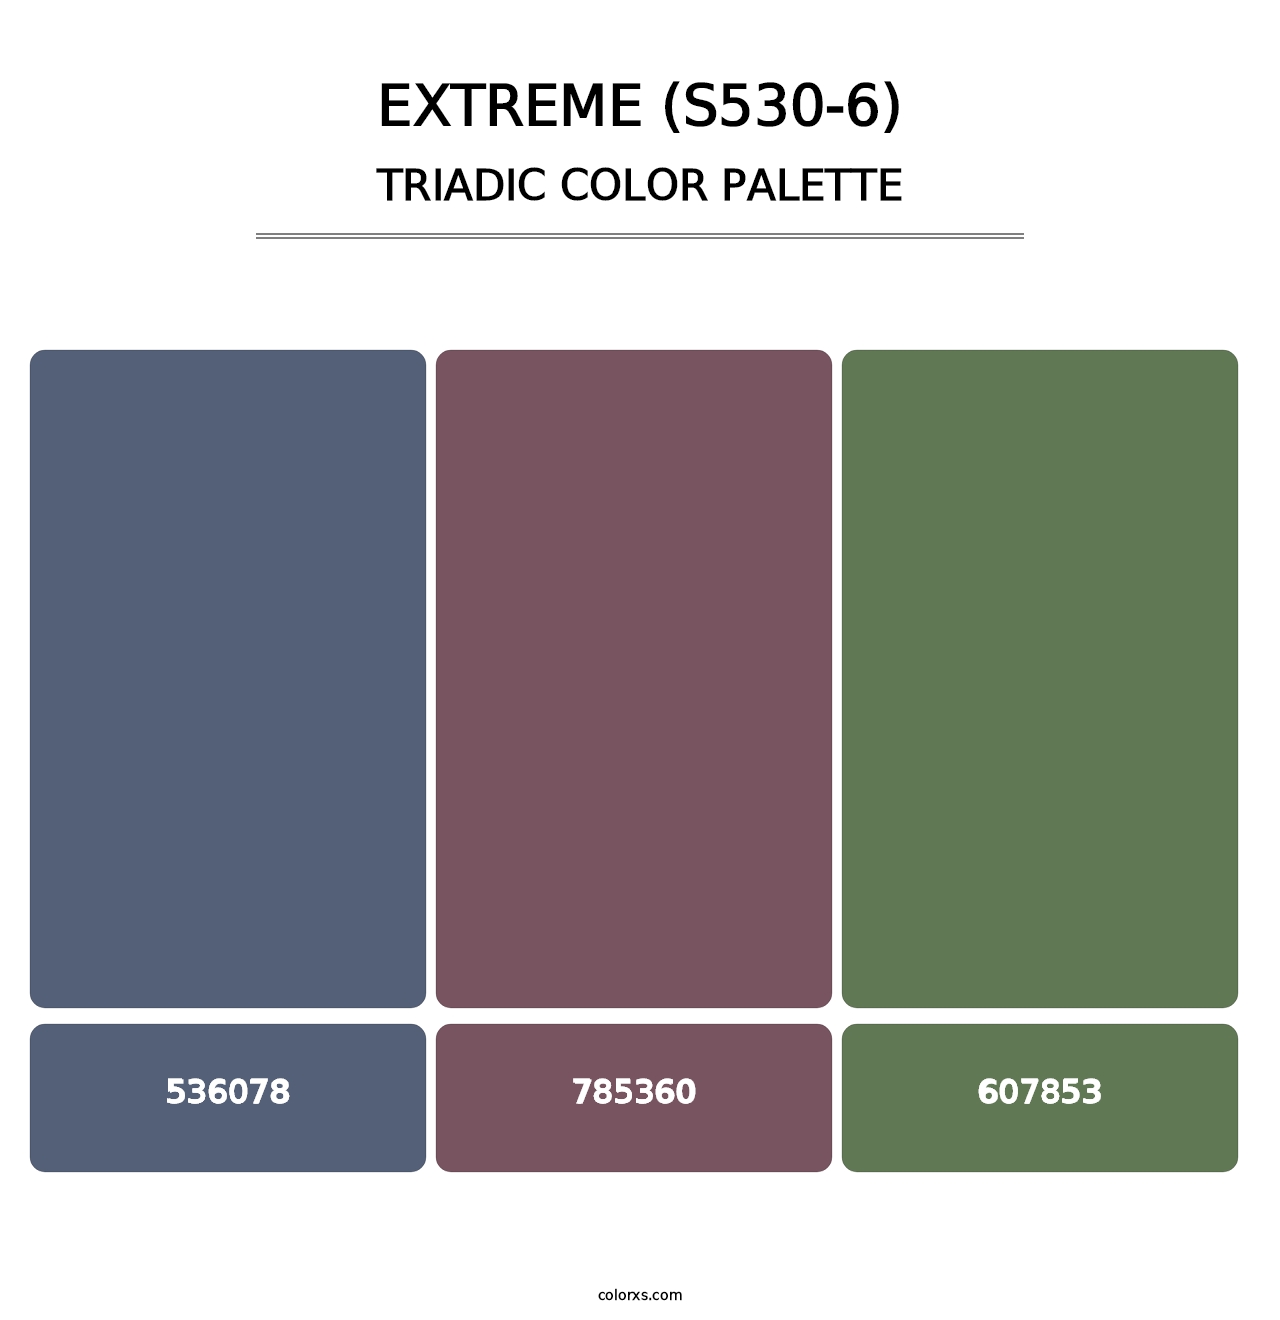 Extreme (S530-6) - Triadic Color Palette